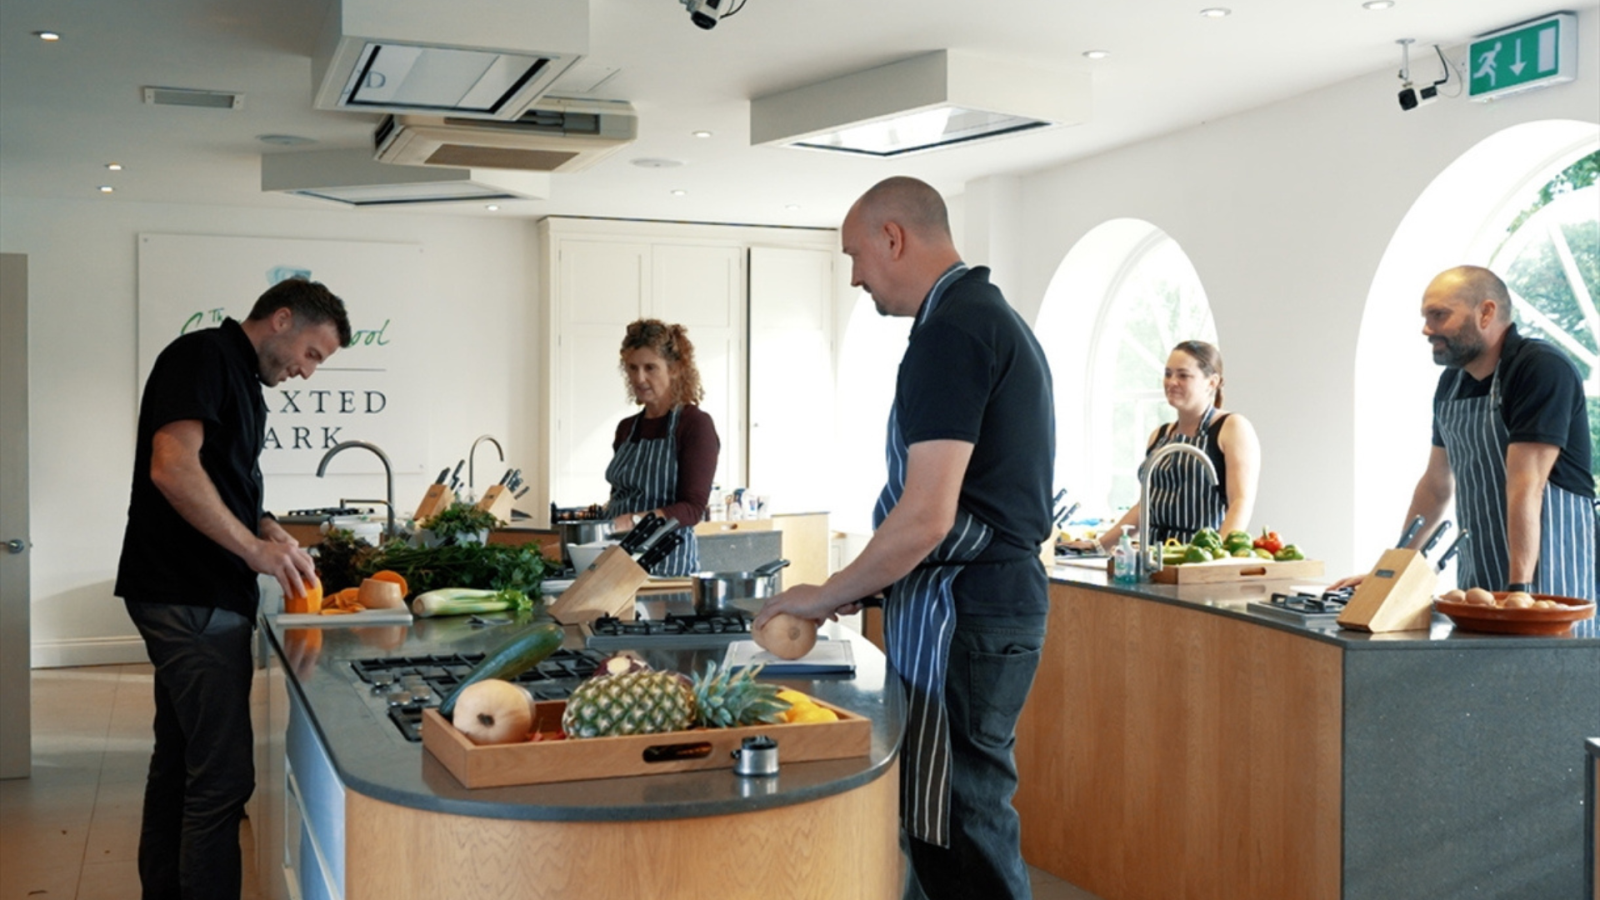 The Cookery School at Braxted Park, Essex